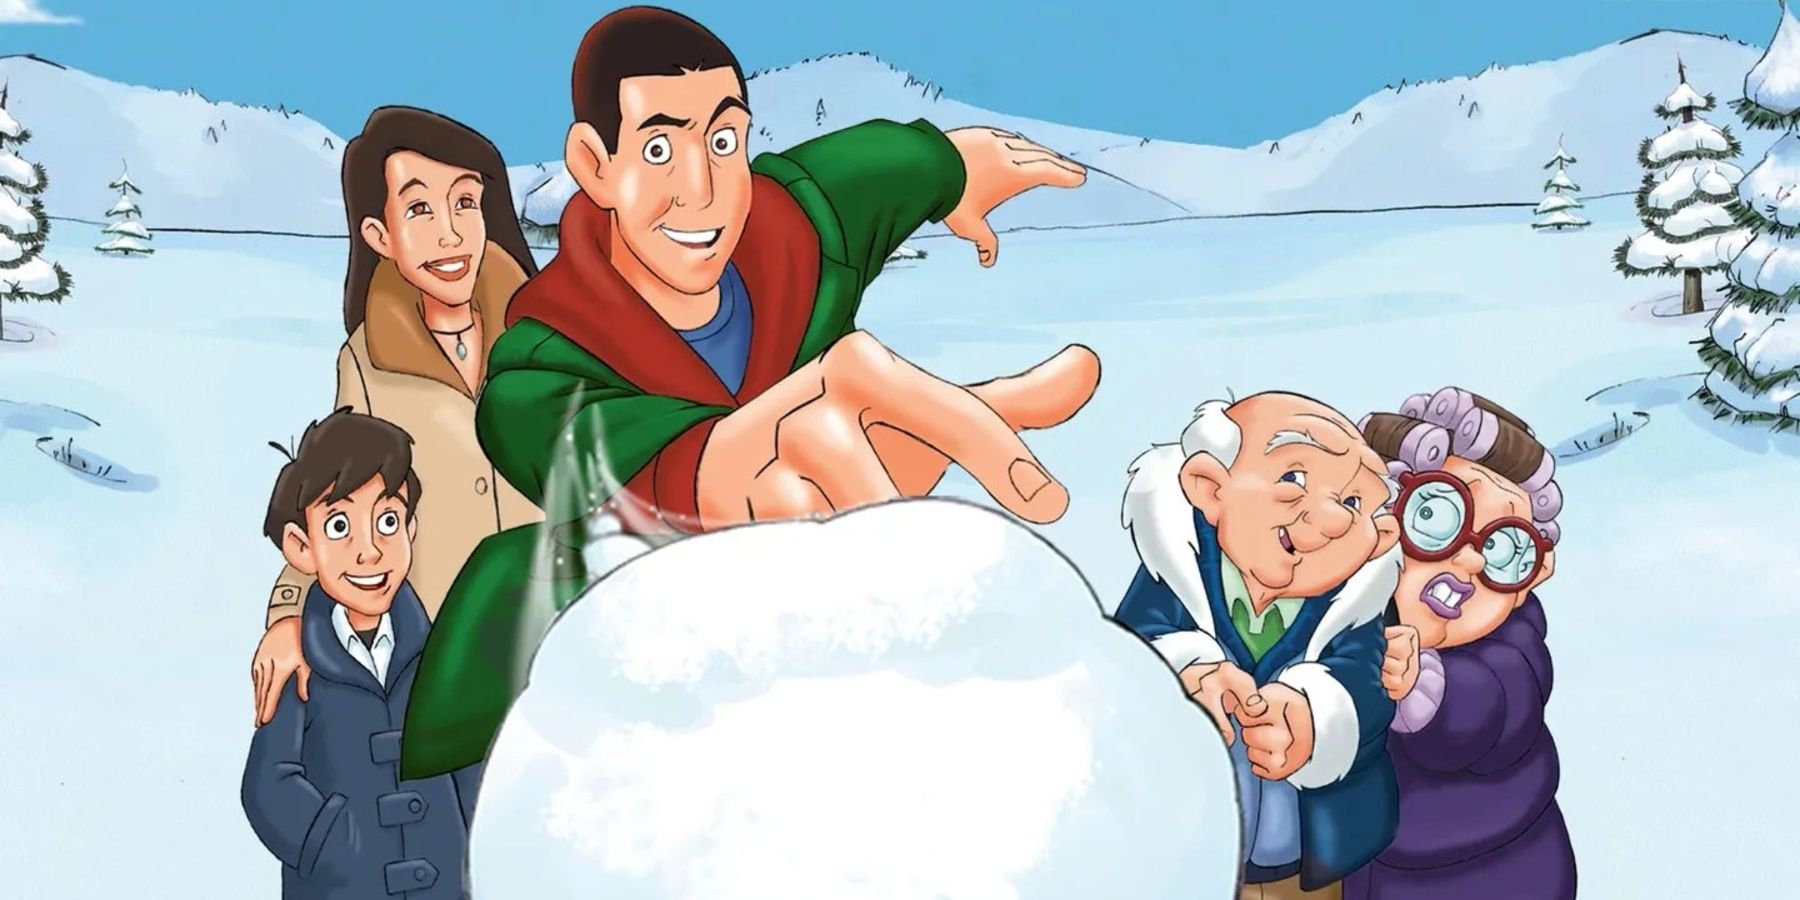 Eight Crazy Nights Davey throws a snowball with the rest of the cast in the background